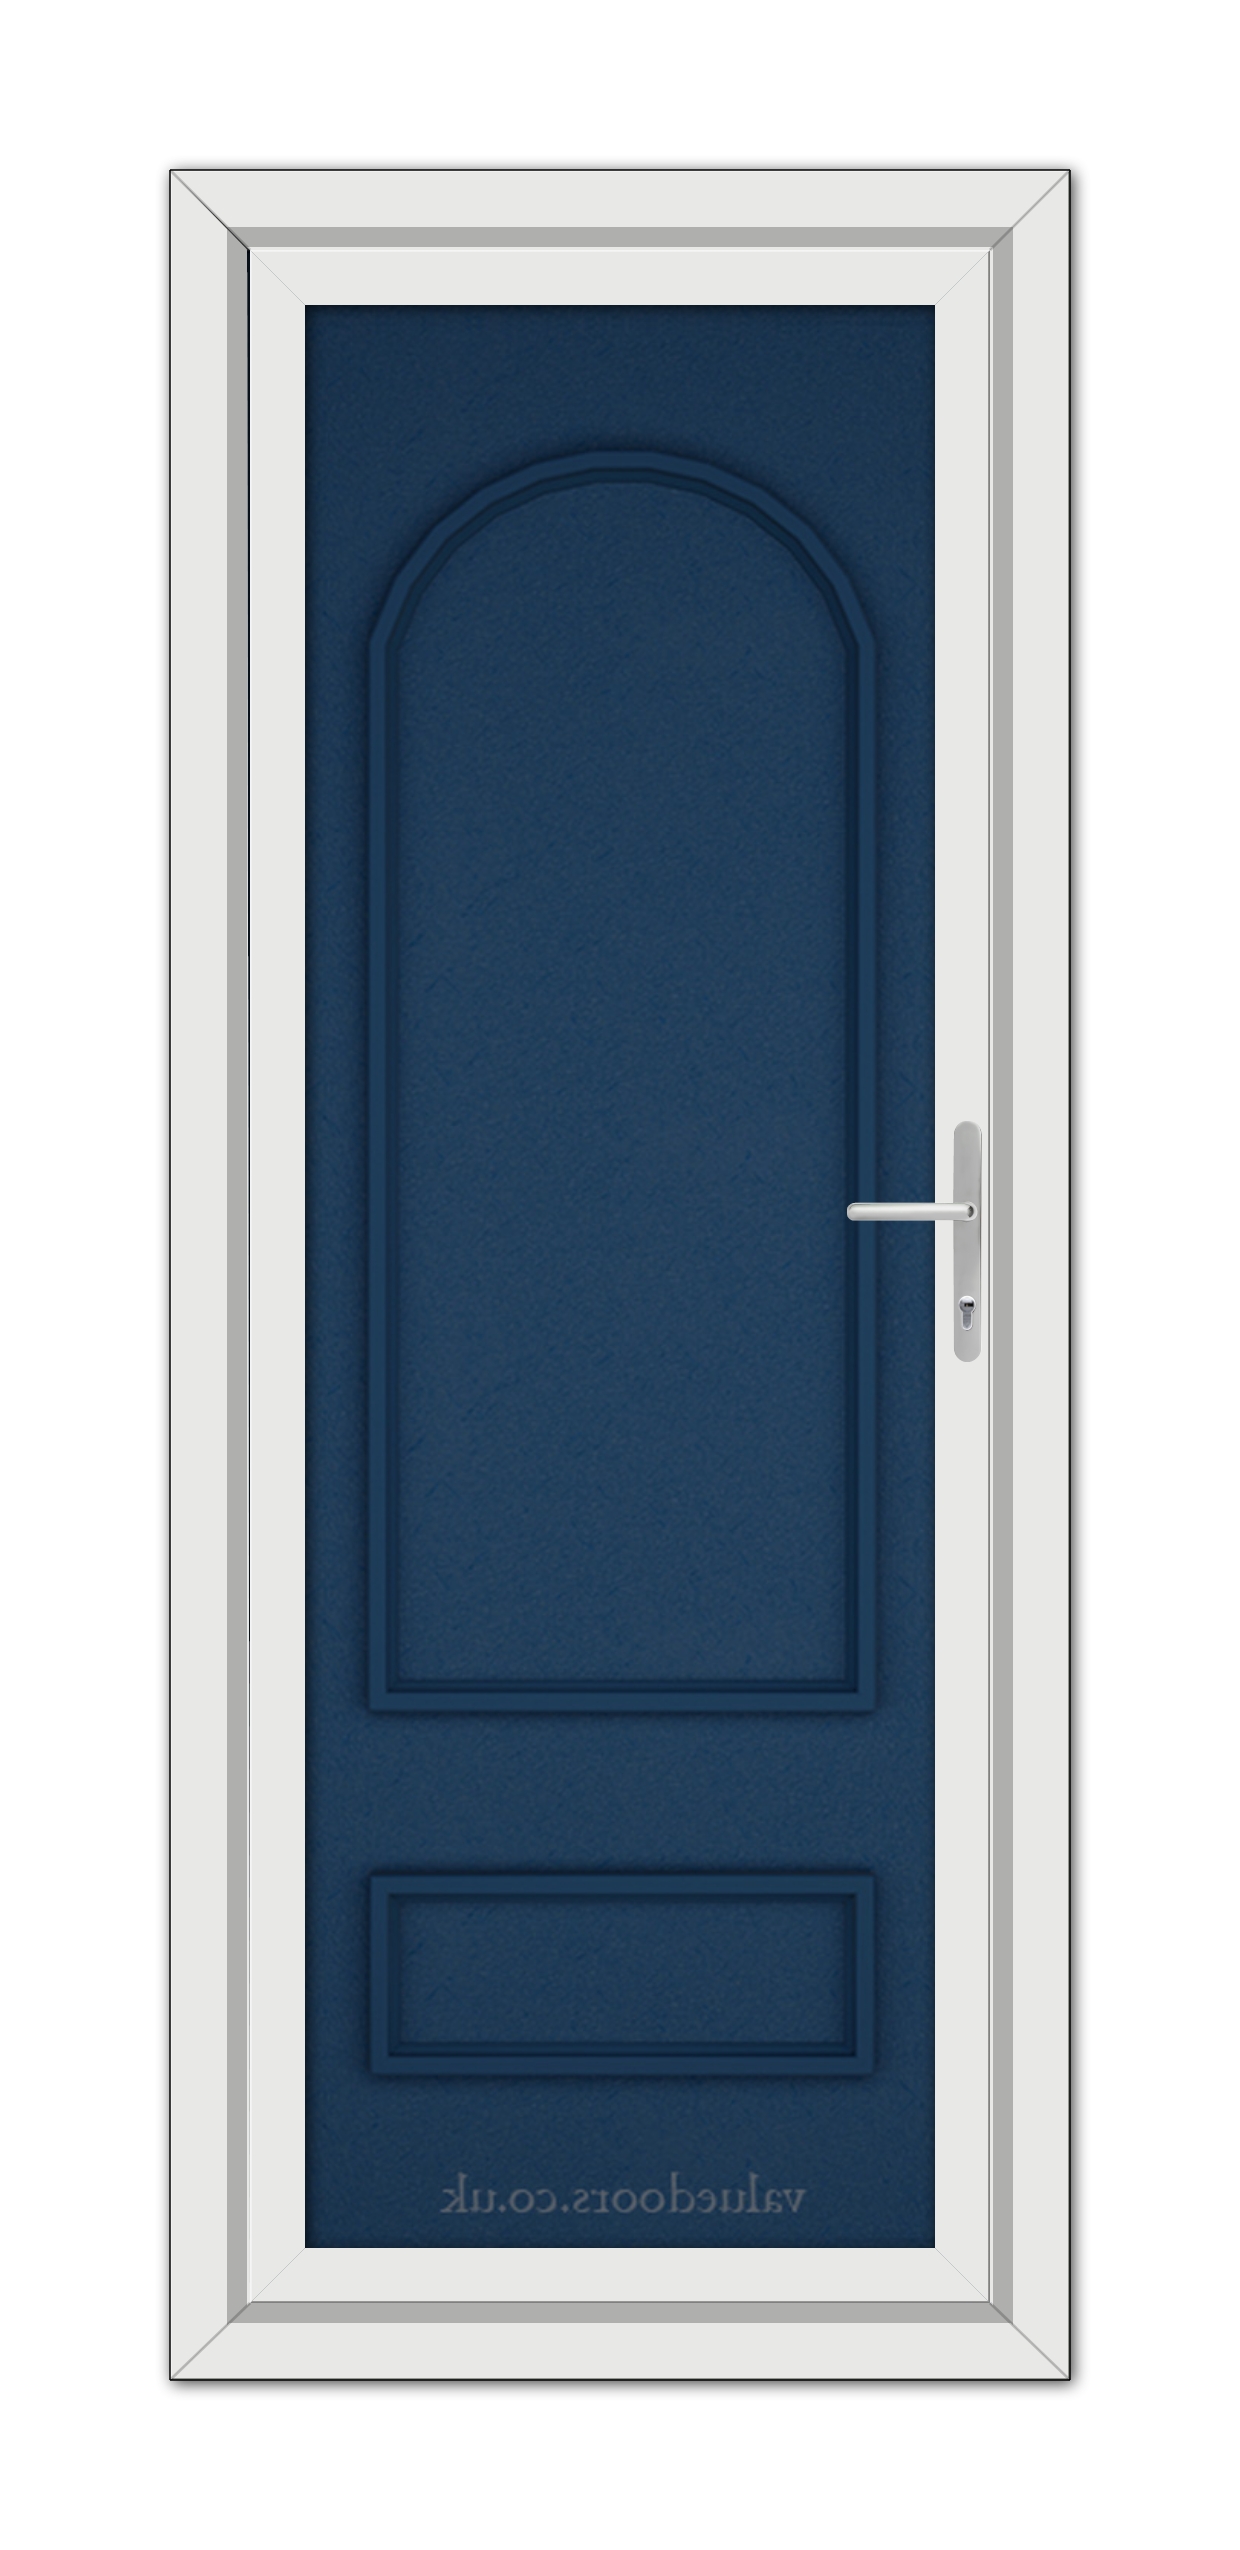 A vertical image of a closed, Blue Canterbury Solid uPVC Door with a white frame and a metallic handle on the right side. The door has a simple, elegant panel design.